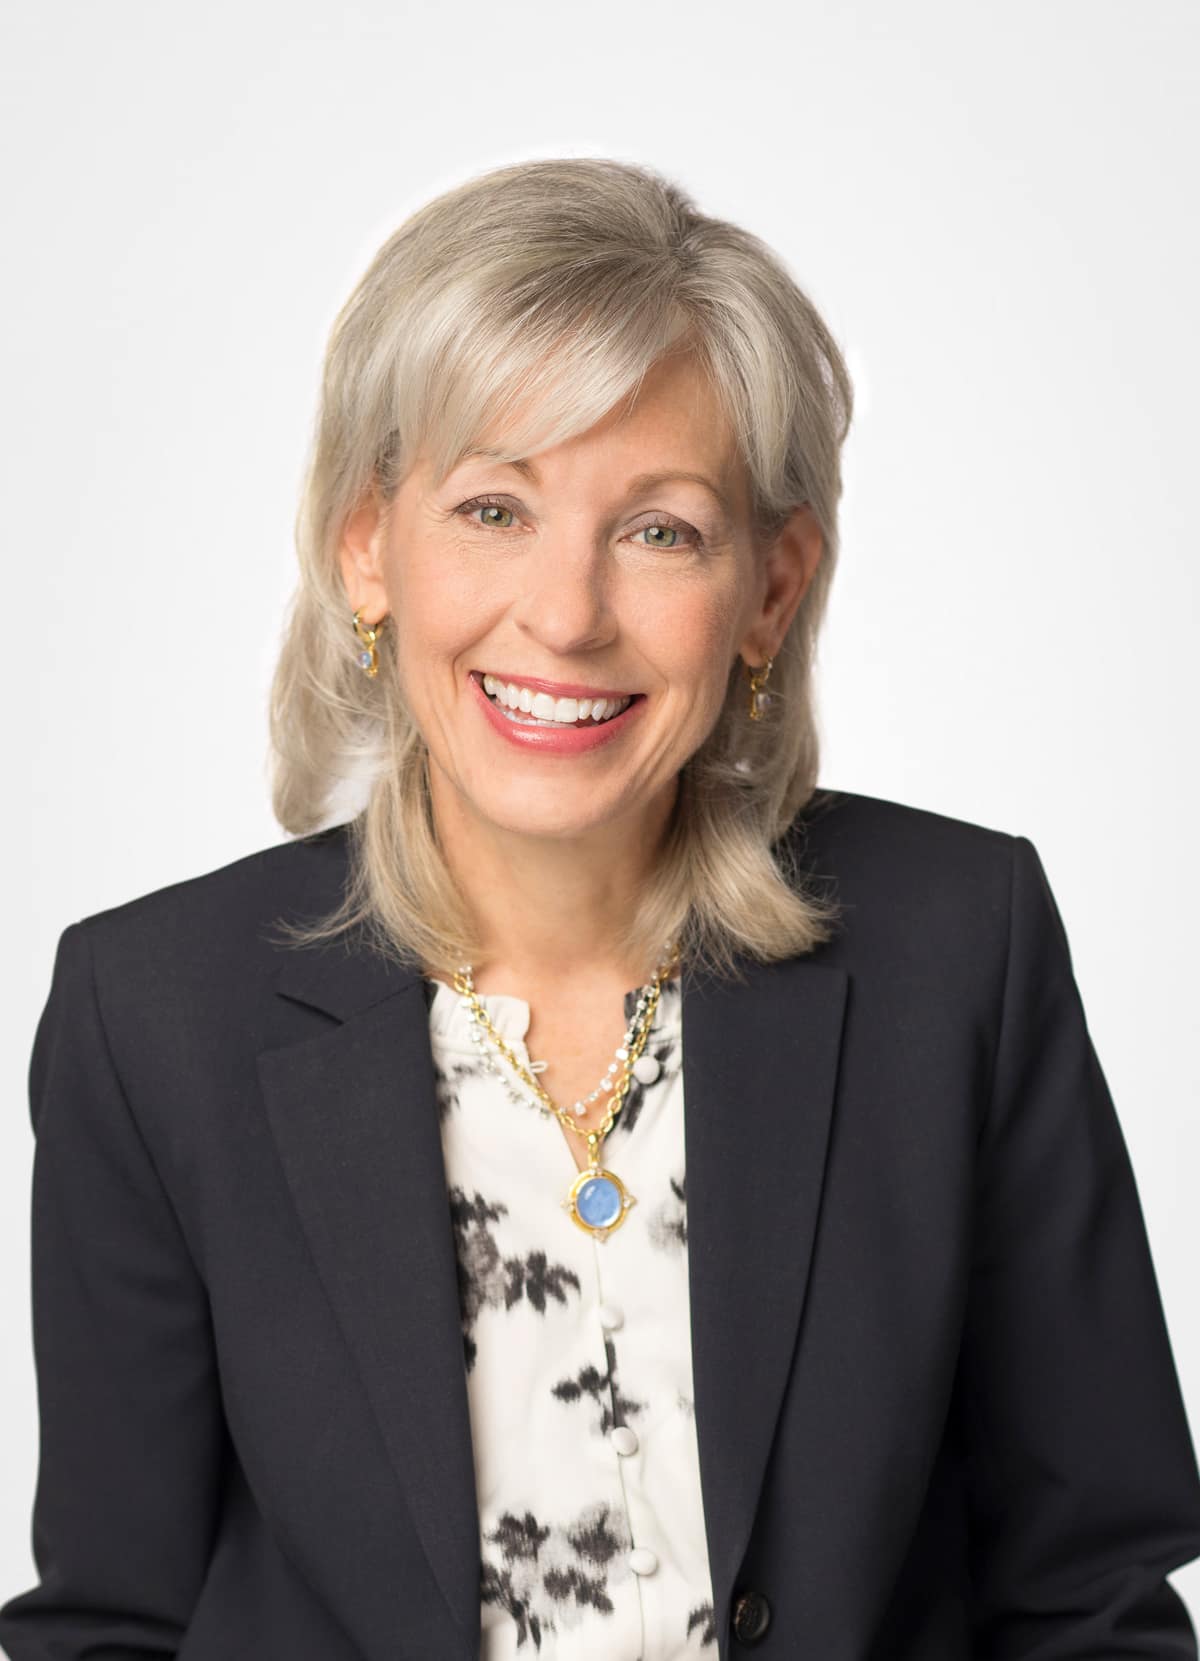 Aviation Business Veteran Leanne Caret Joins Embry-Riddle’s Board of Trustees